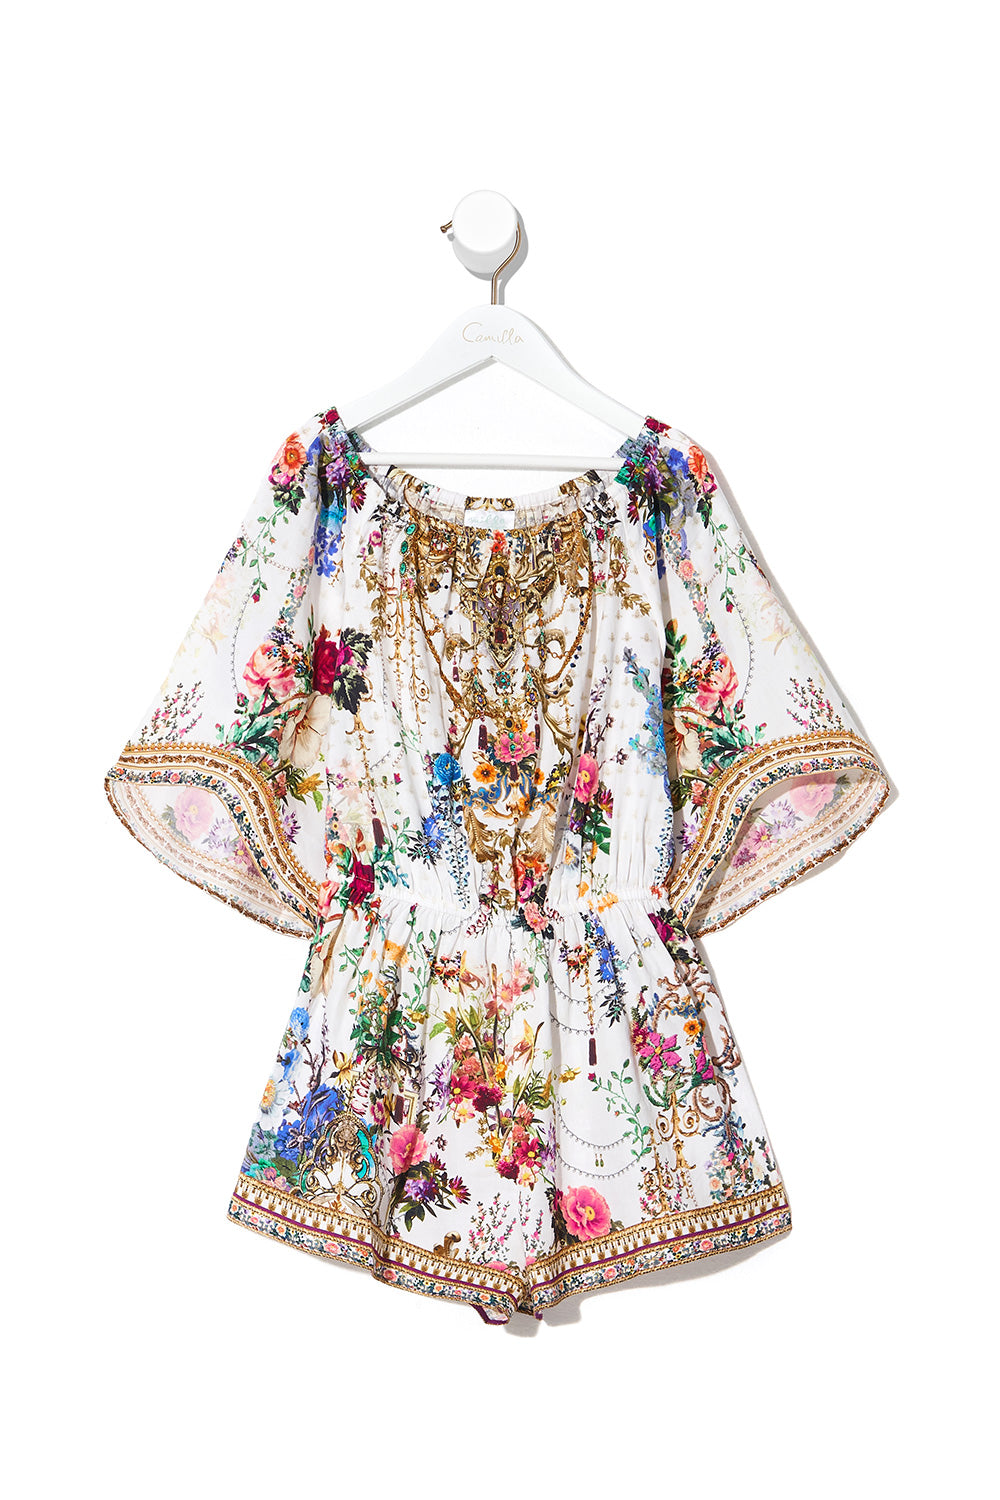 KIDS 3/4 FLARE SLEEVE PLAYSUIT 12-14 BY THE MEADOW